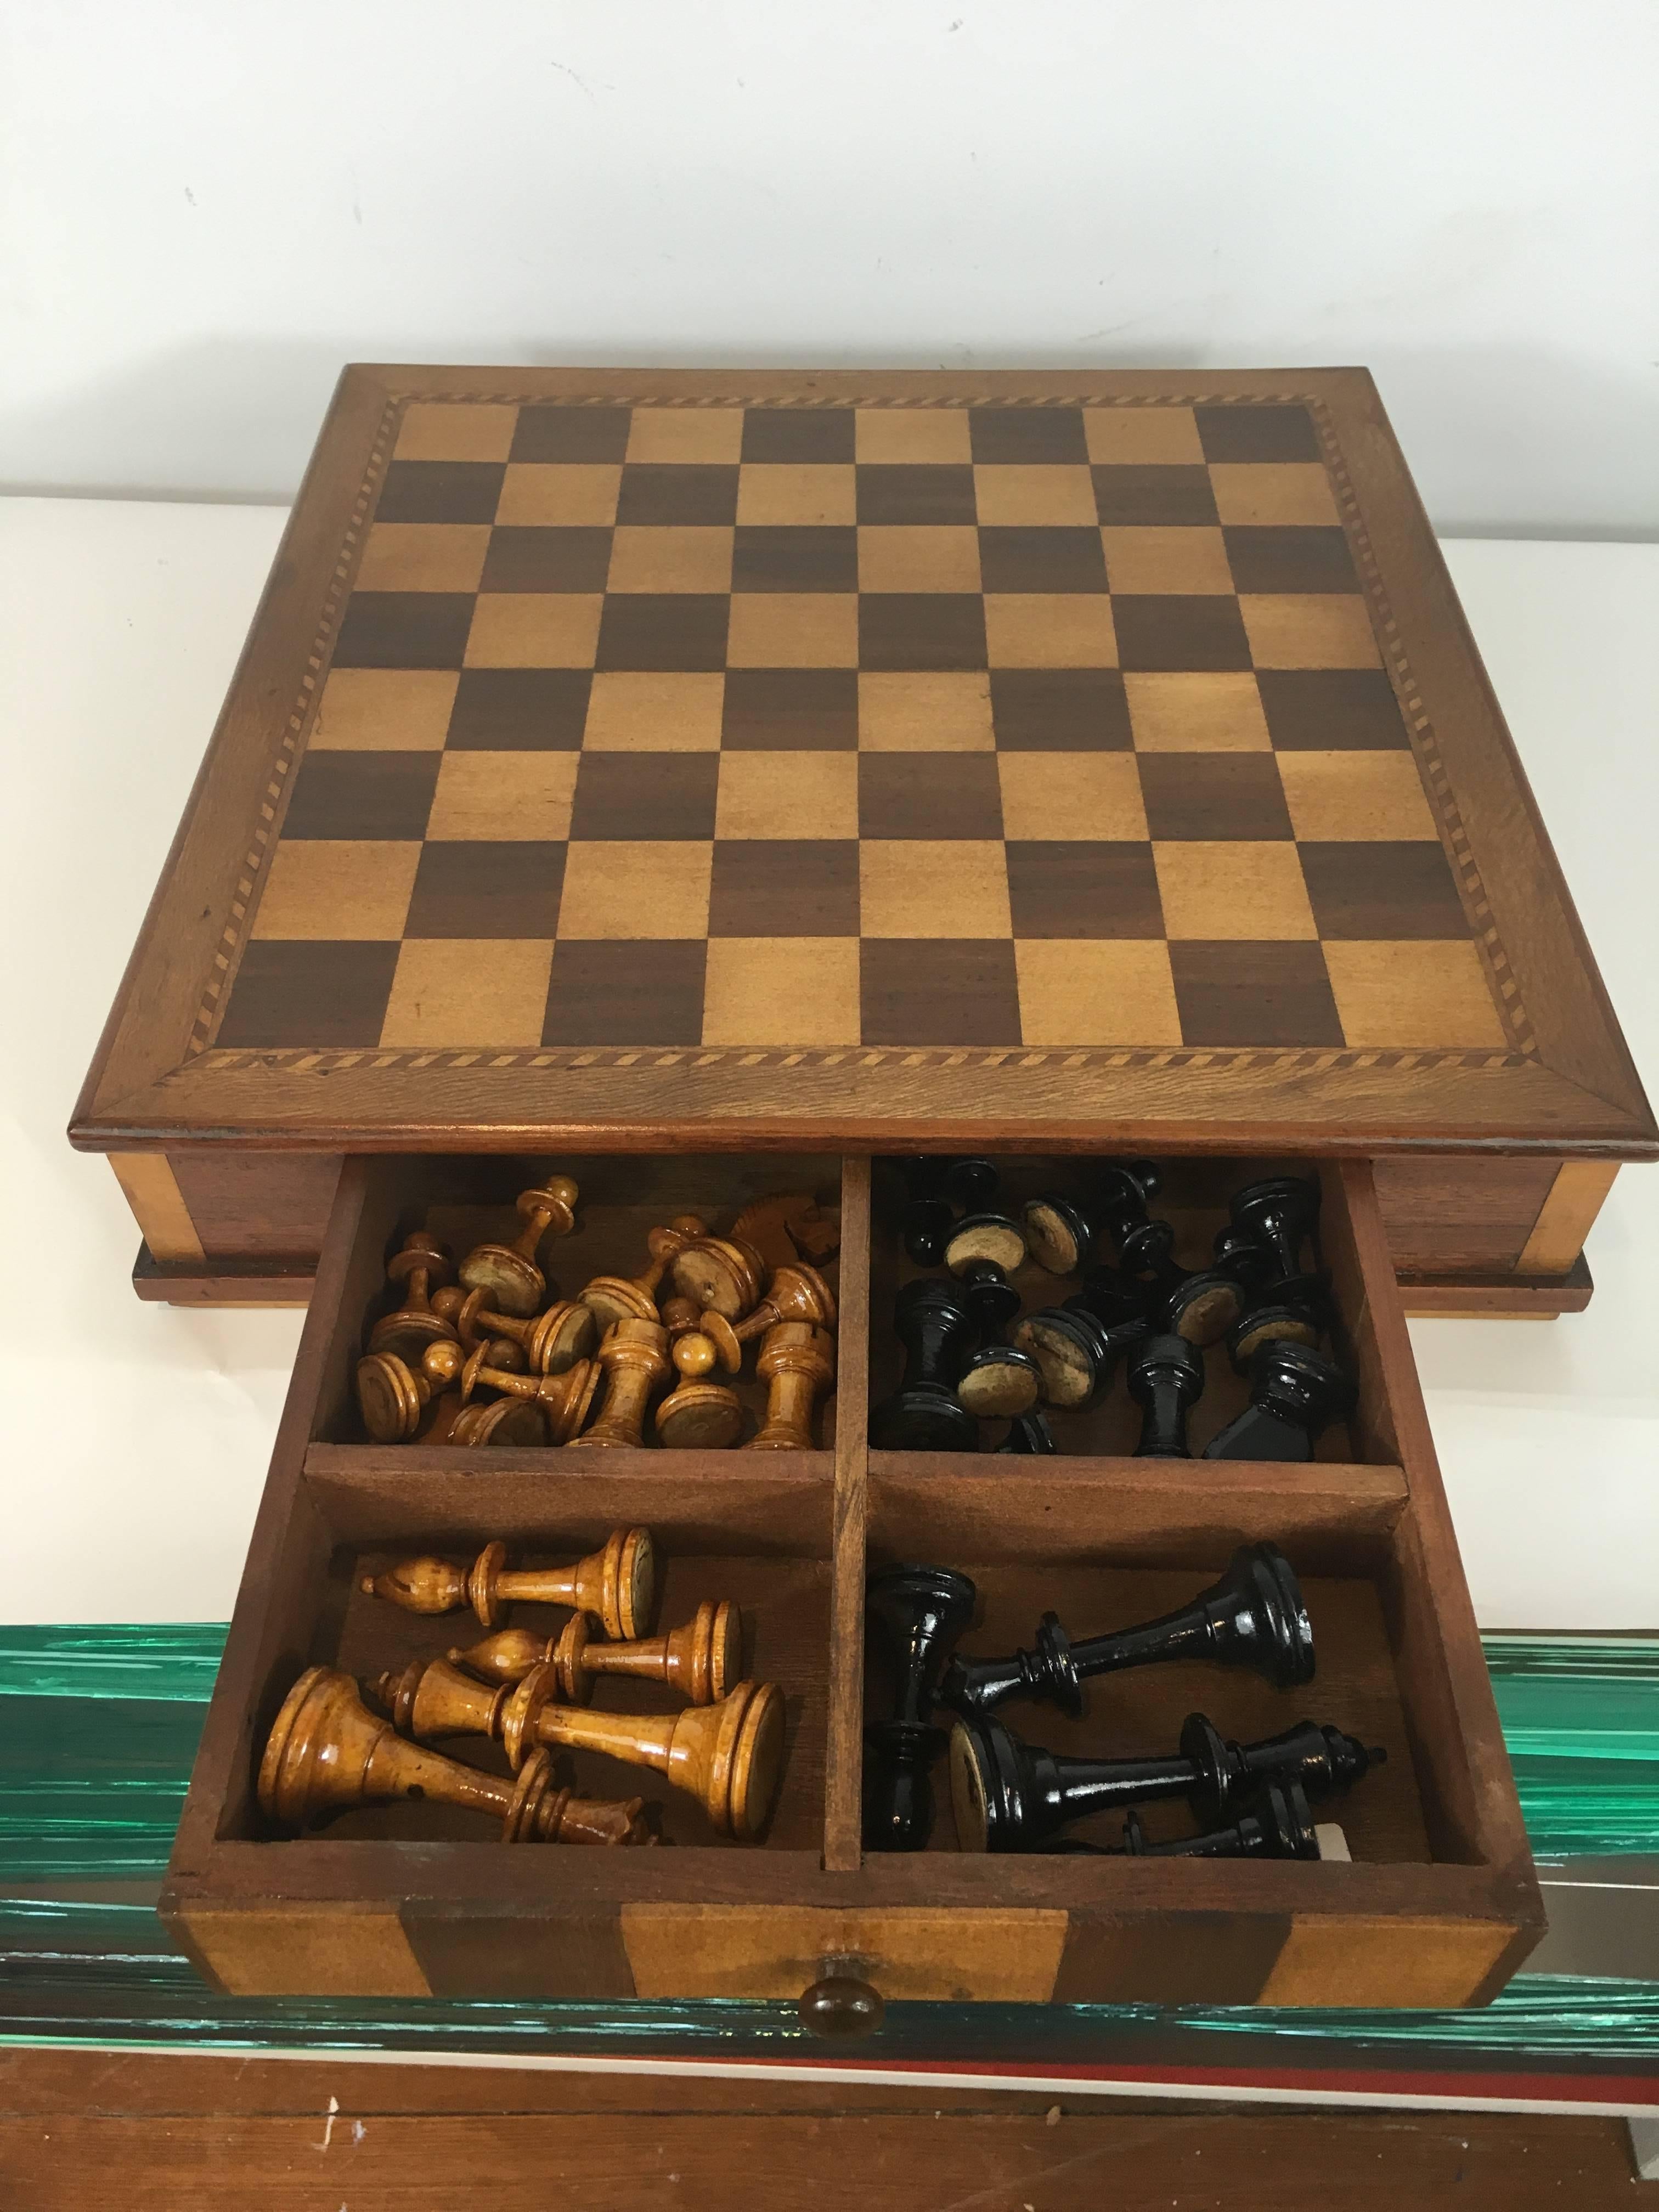 Late Victorian Victorian Chess Set